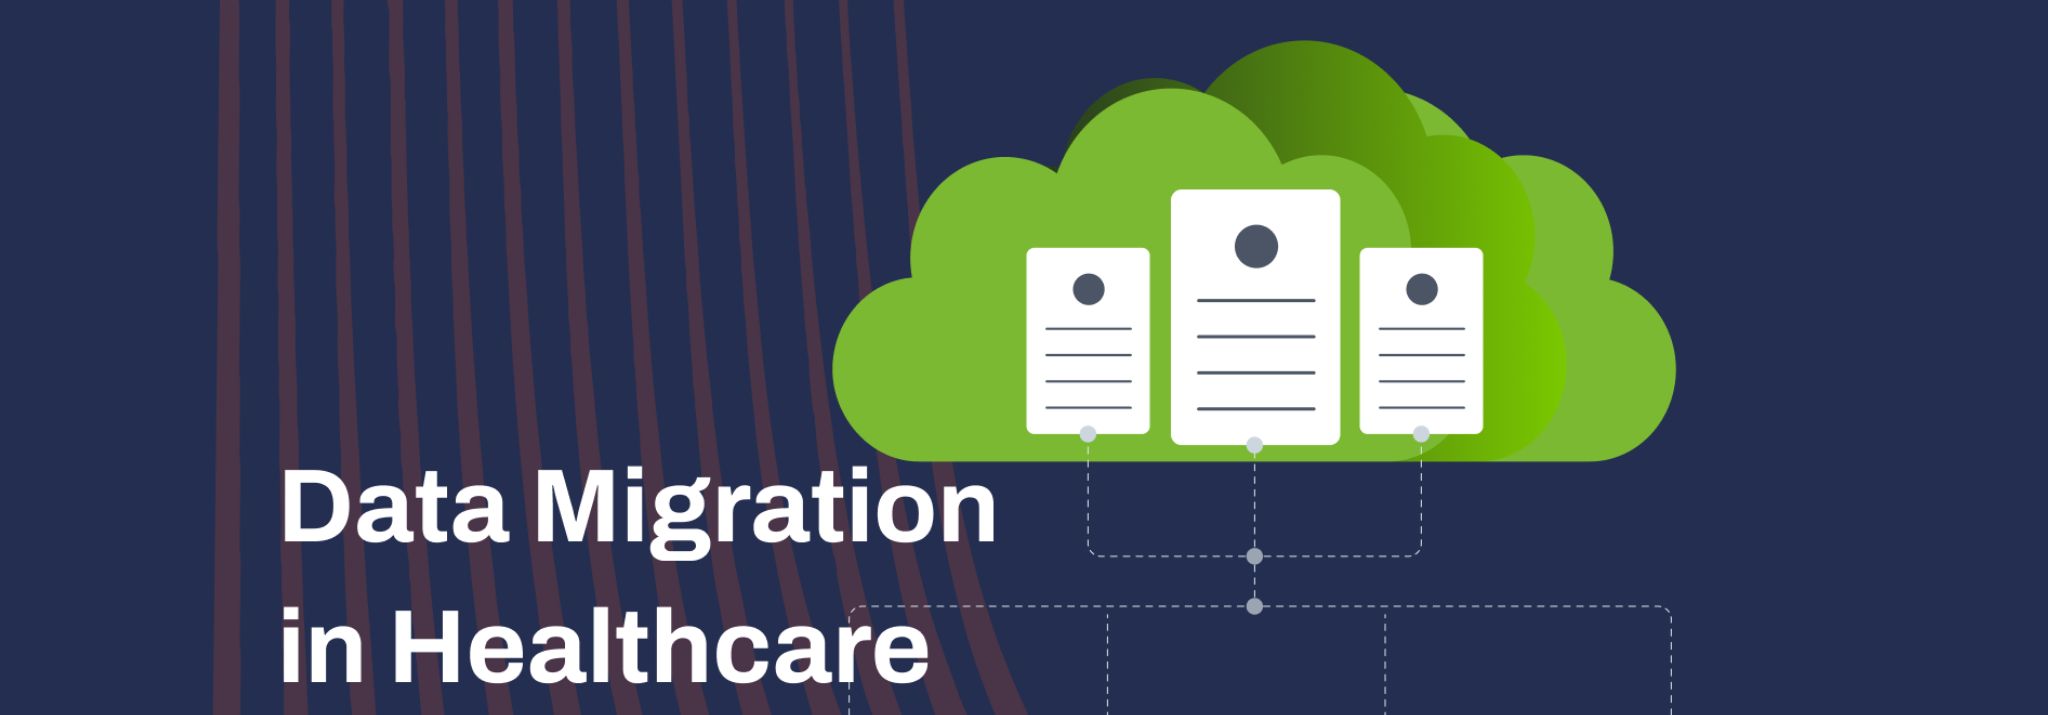 Data migration in healthcare: Tools, challenges, and stages